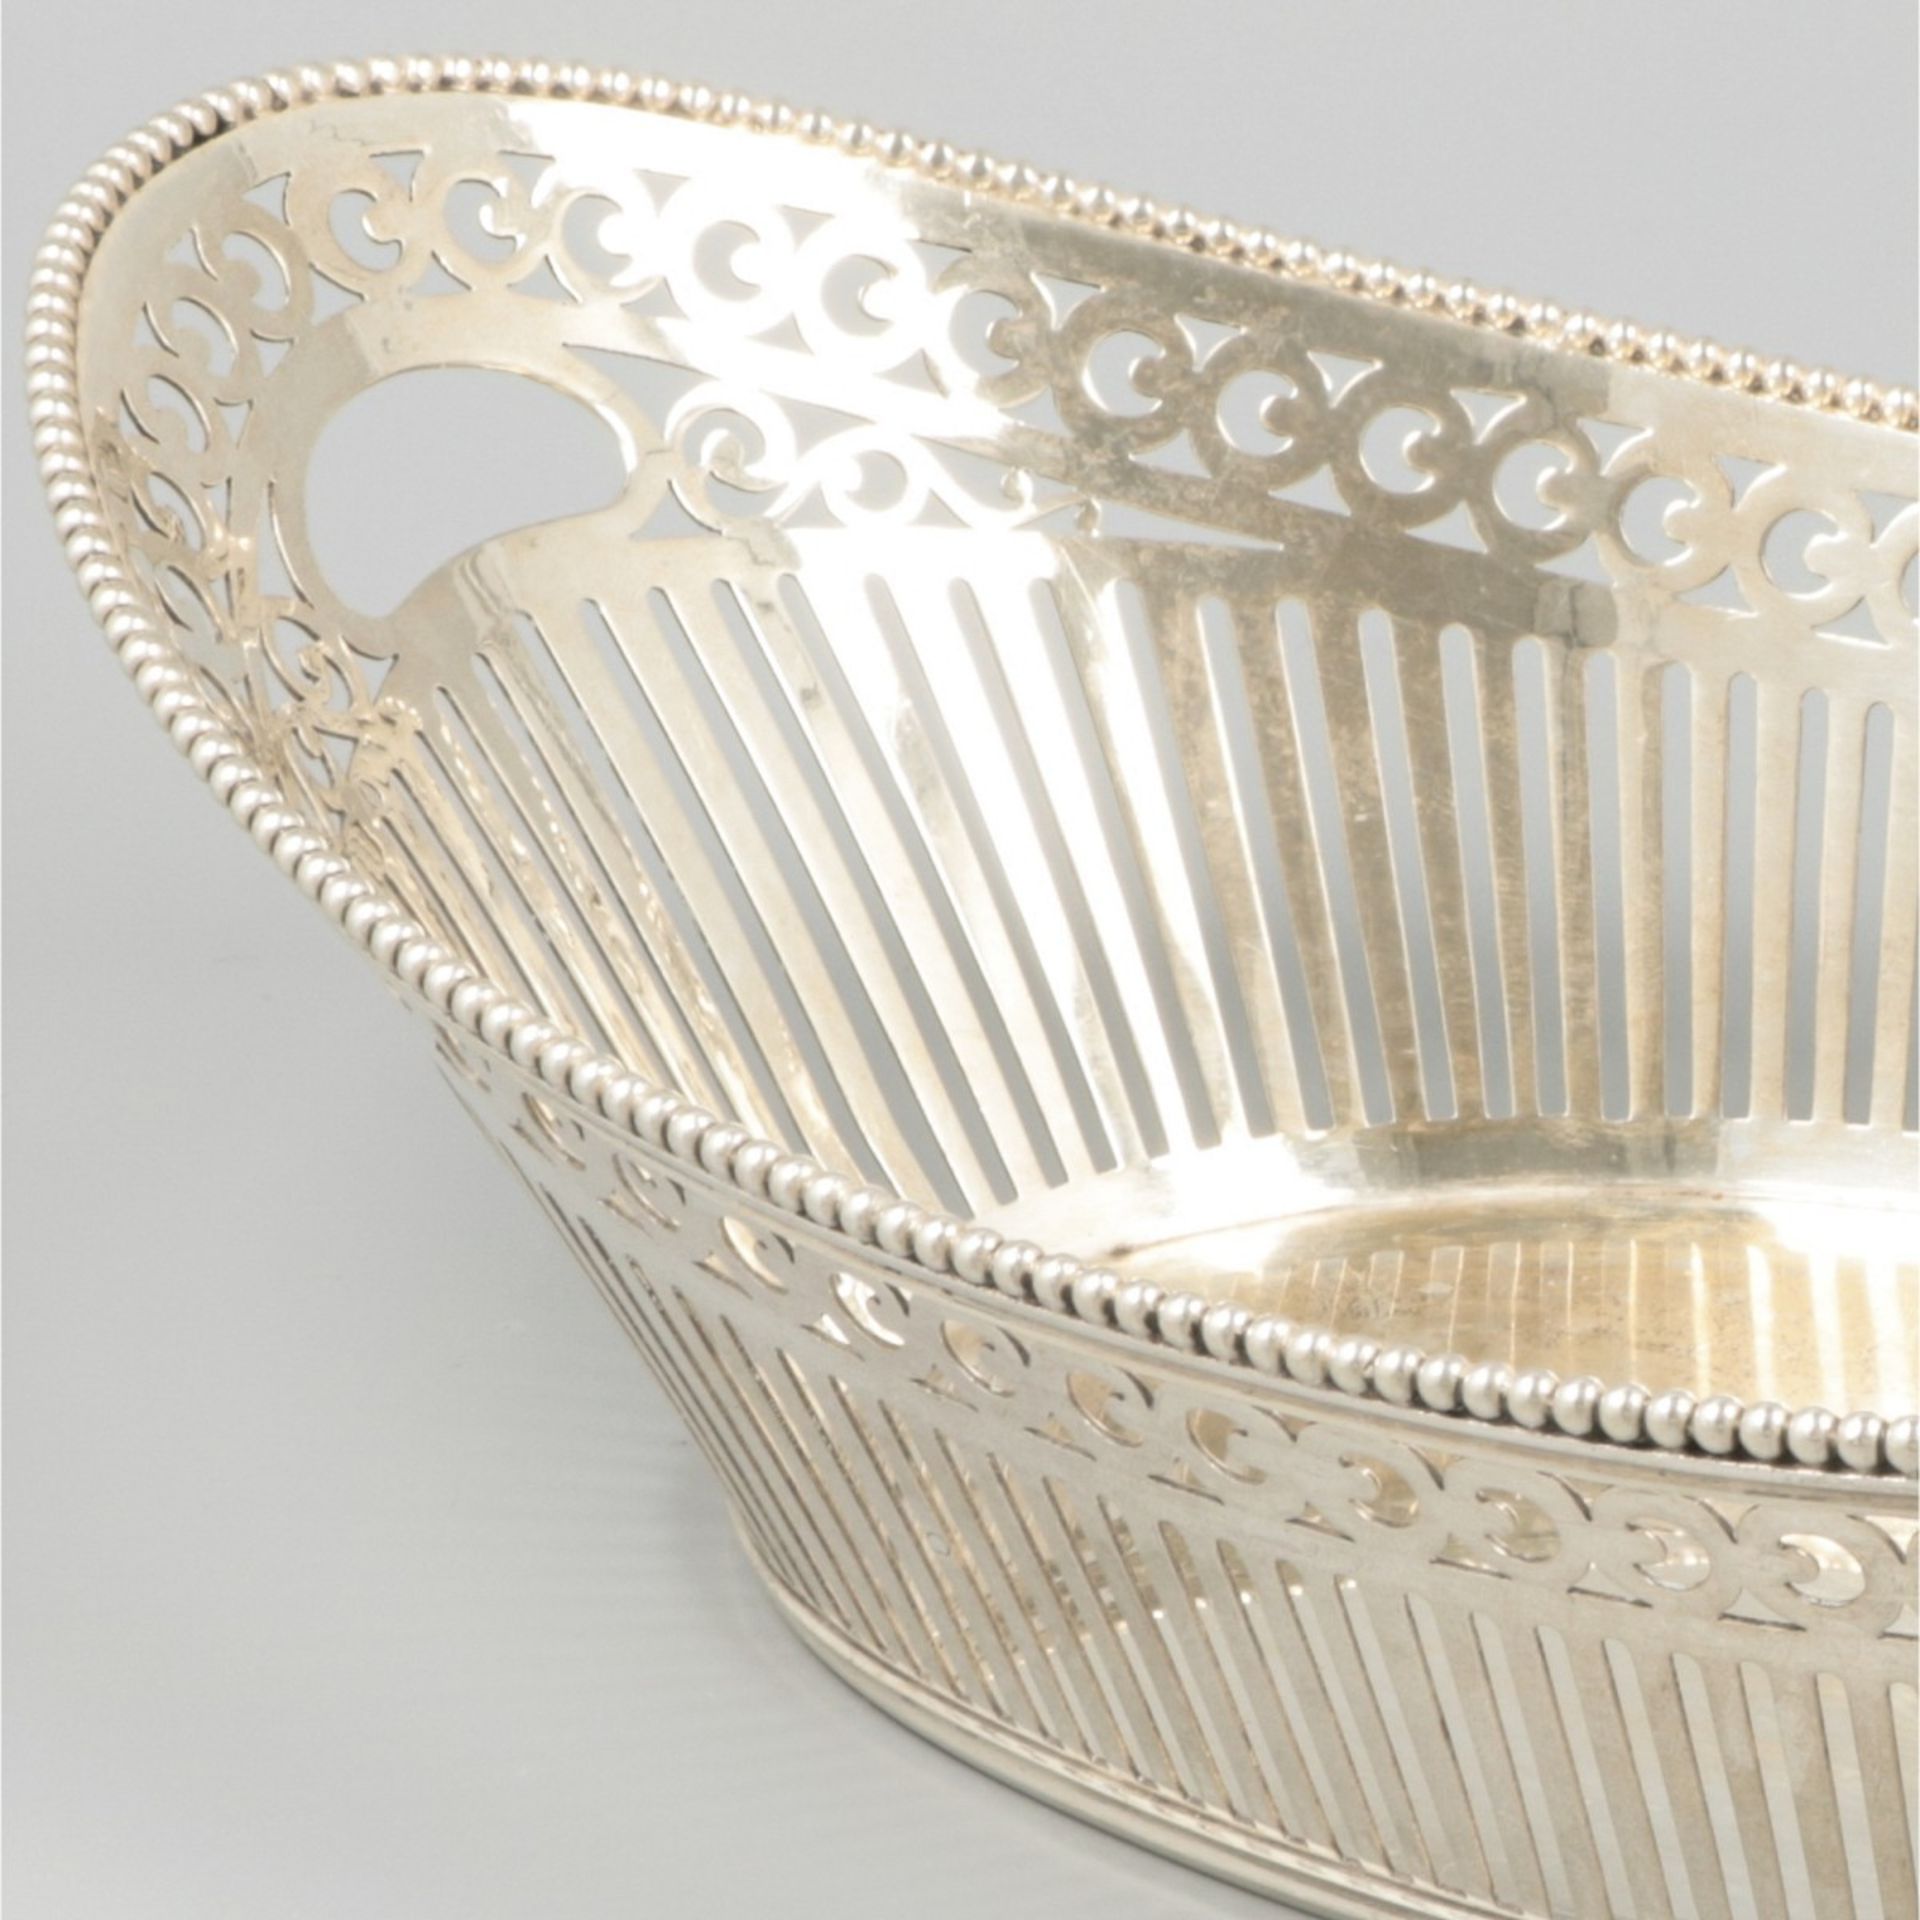 Puff / bread basket silver. - Image 2 of 6